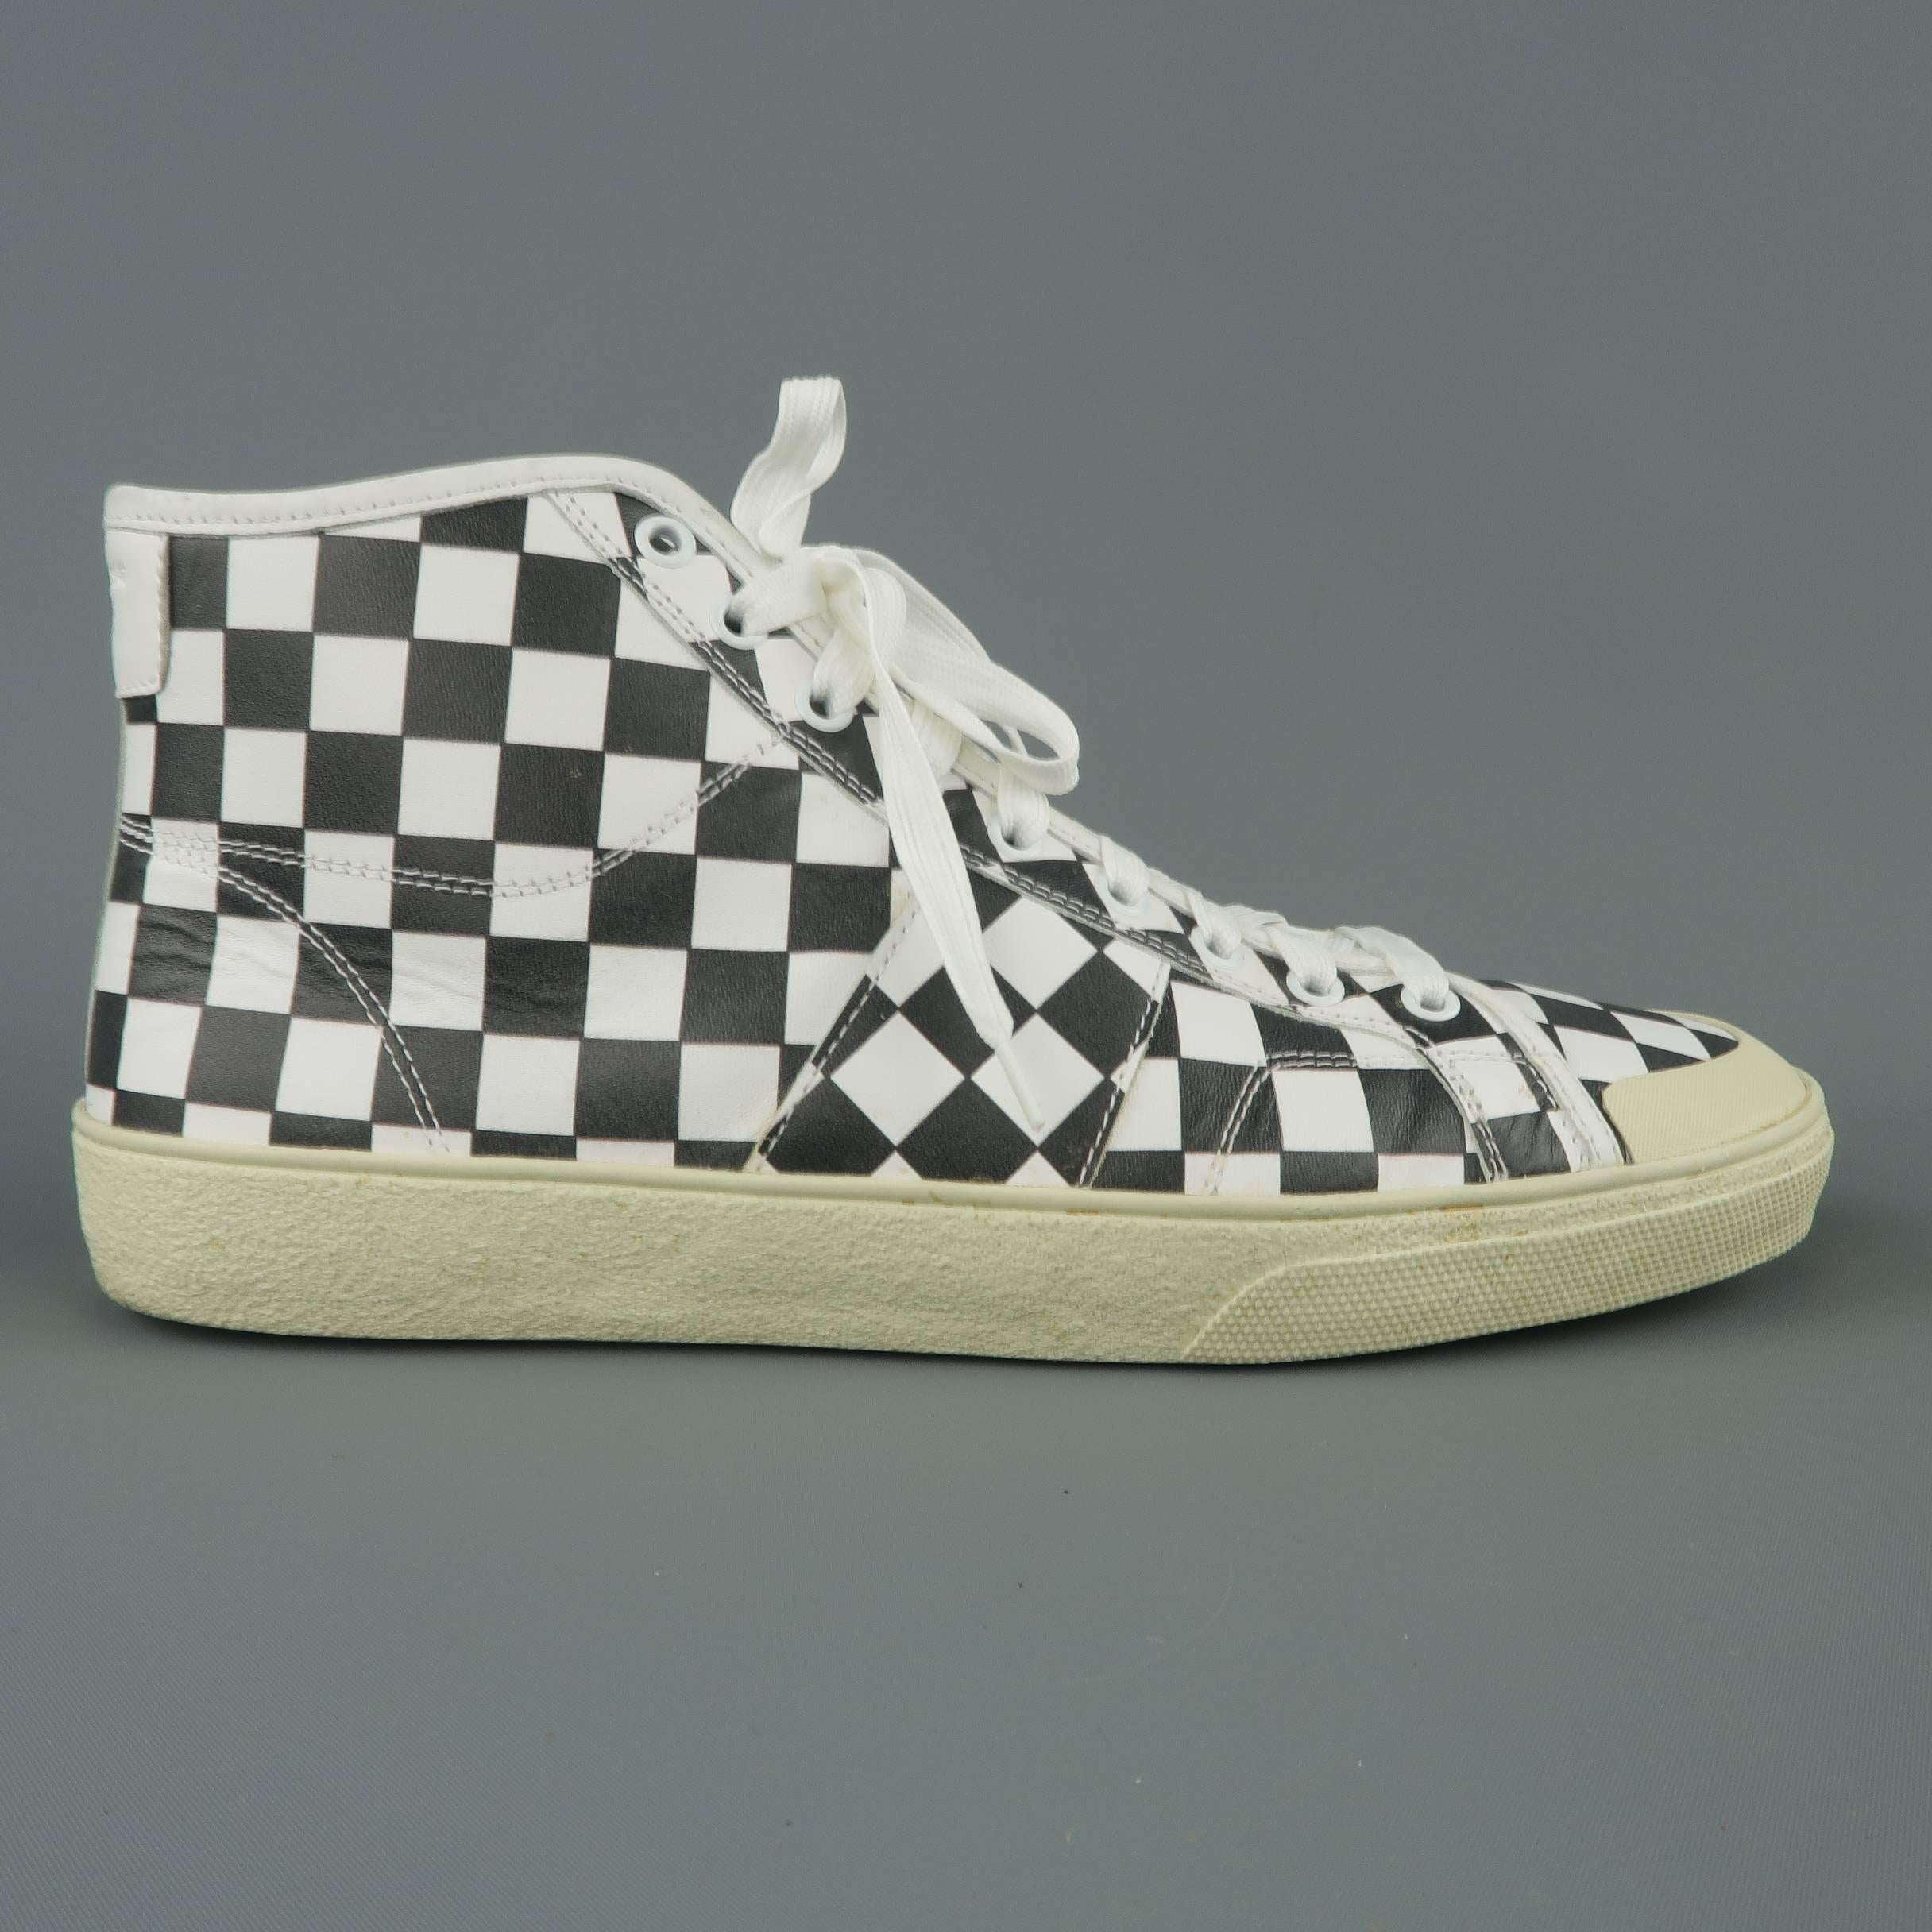 SAINT LAURENT SL/37M high top sneakers come in black and white checkered print leather with a beige rubber sole and white and metallic gold laces. With box. Made in Spain.
 
Excellent Pre-Owned Condition.
Marked: IT 43
 
Outsole: 11.5 x 4 in.
